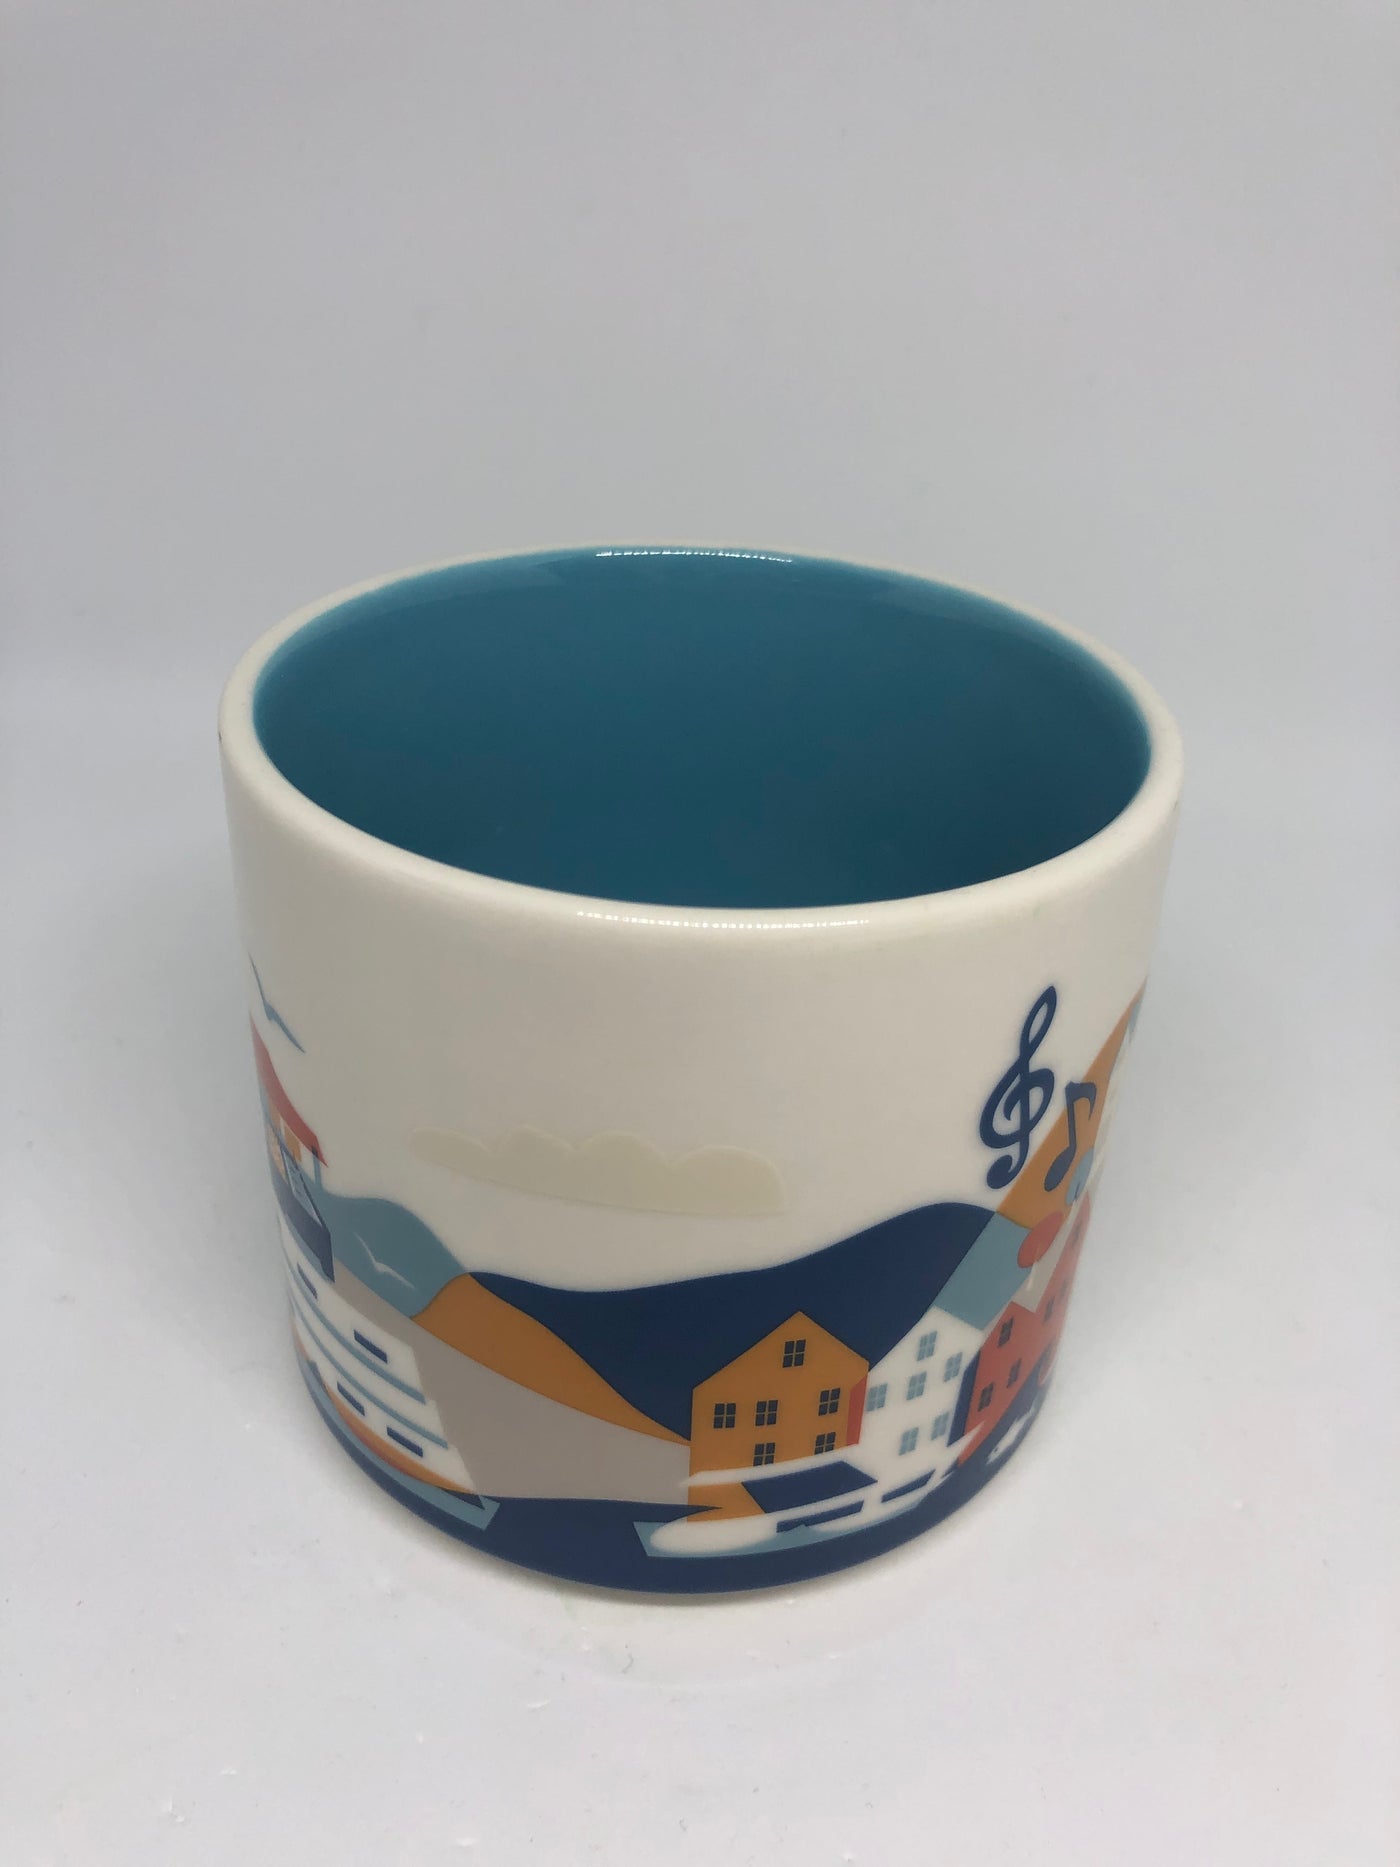 Starbucks You Are Here Collection Norway Bergen Ceramic Coffee Mug New with Box